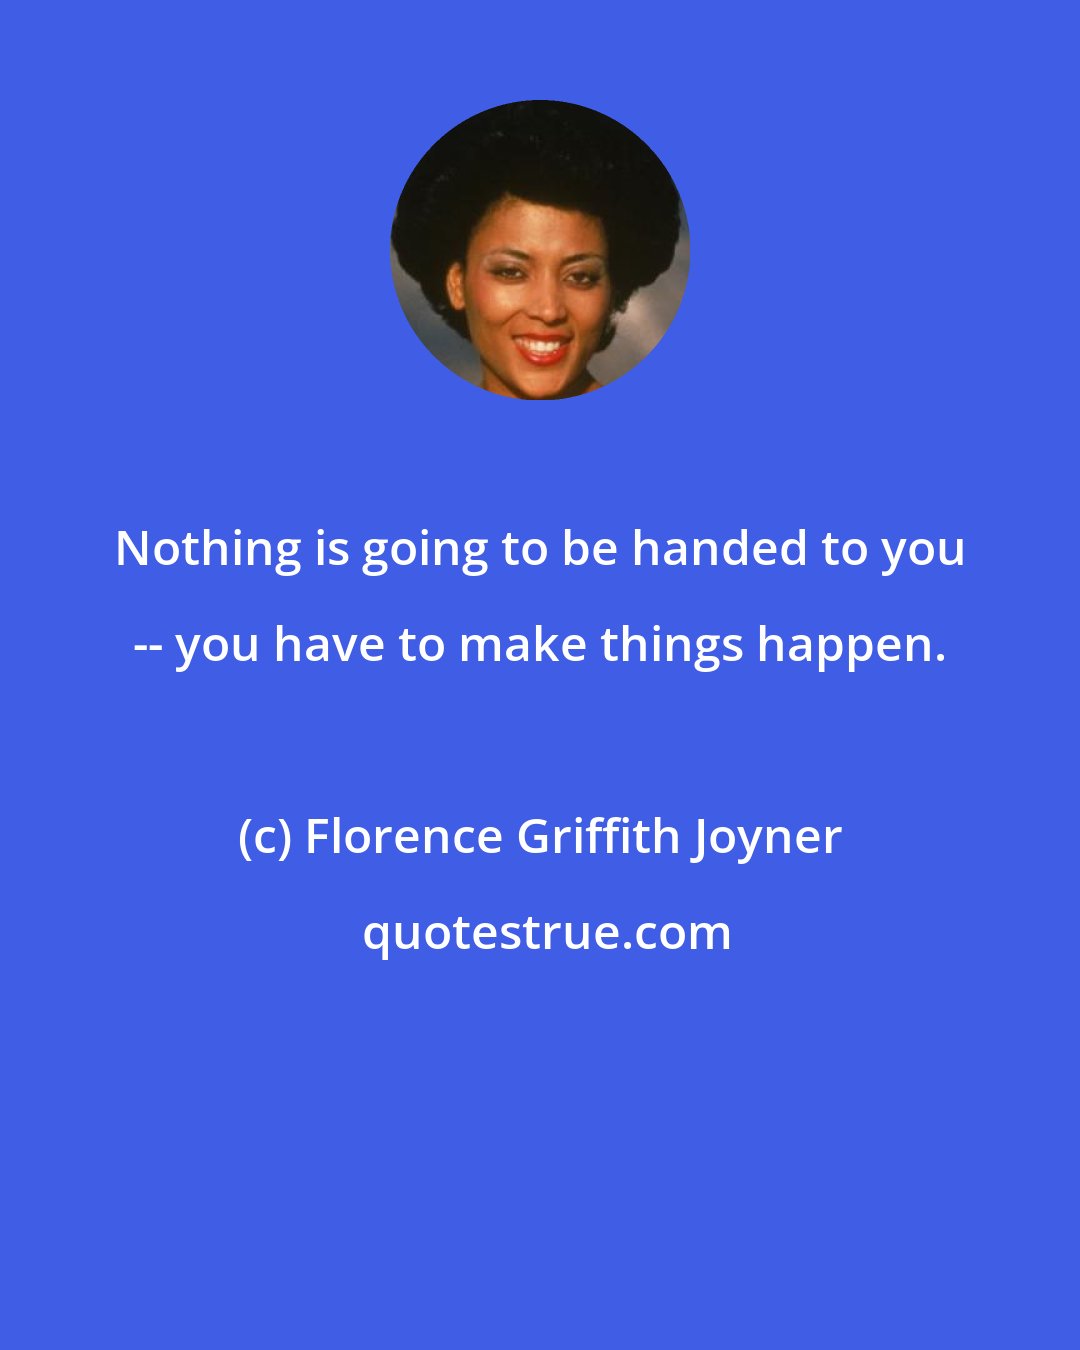 Florence Griffith Joyner: Nothing is going to be handed to you -- you have to make things happen.